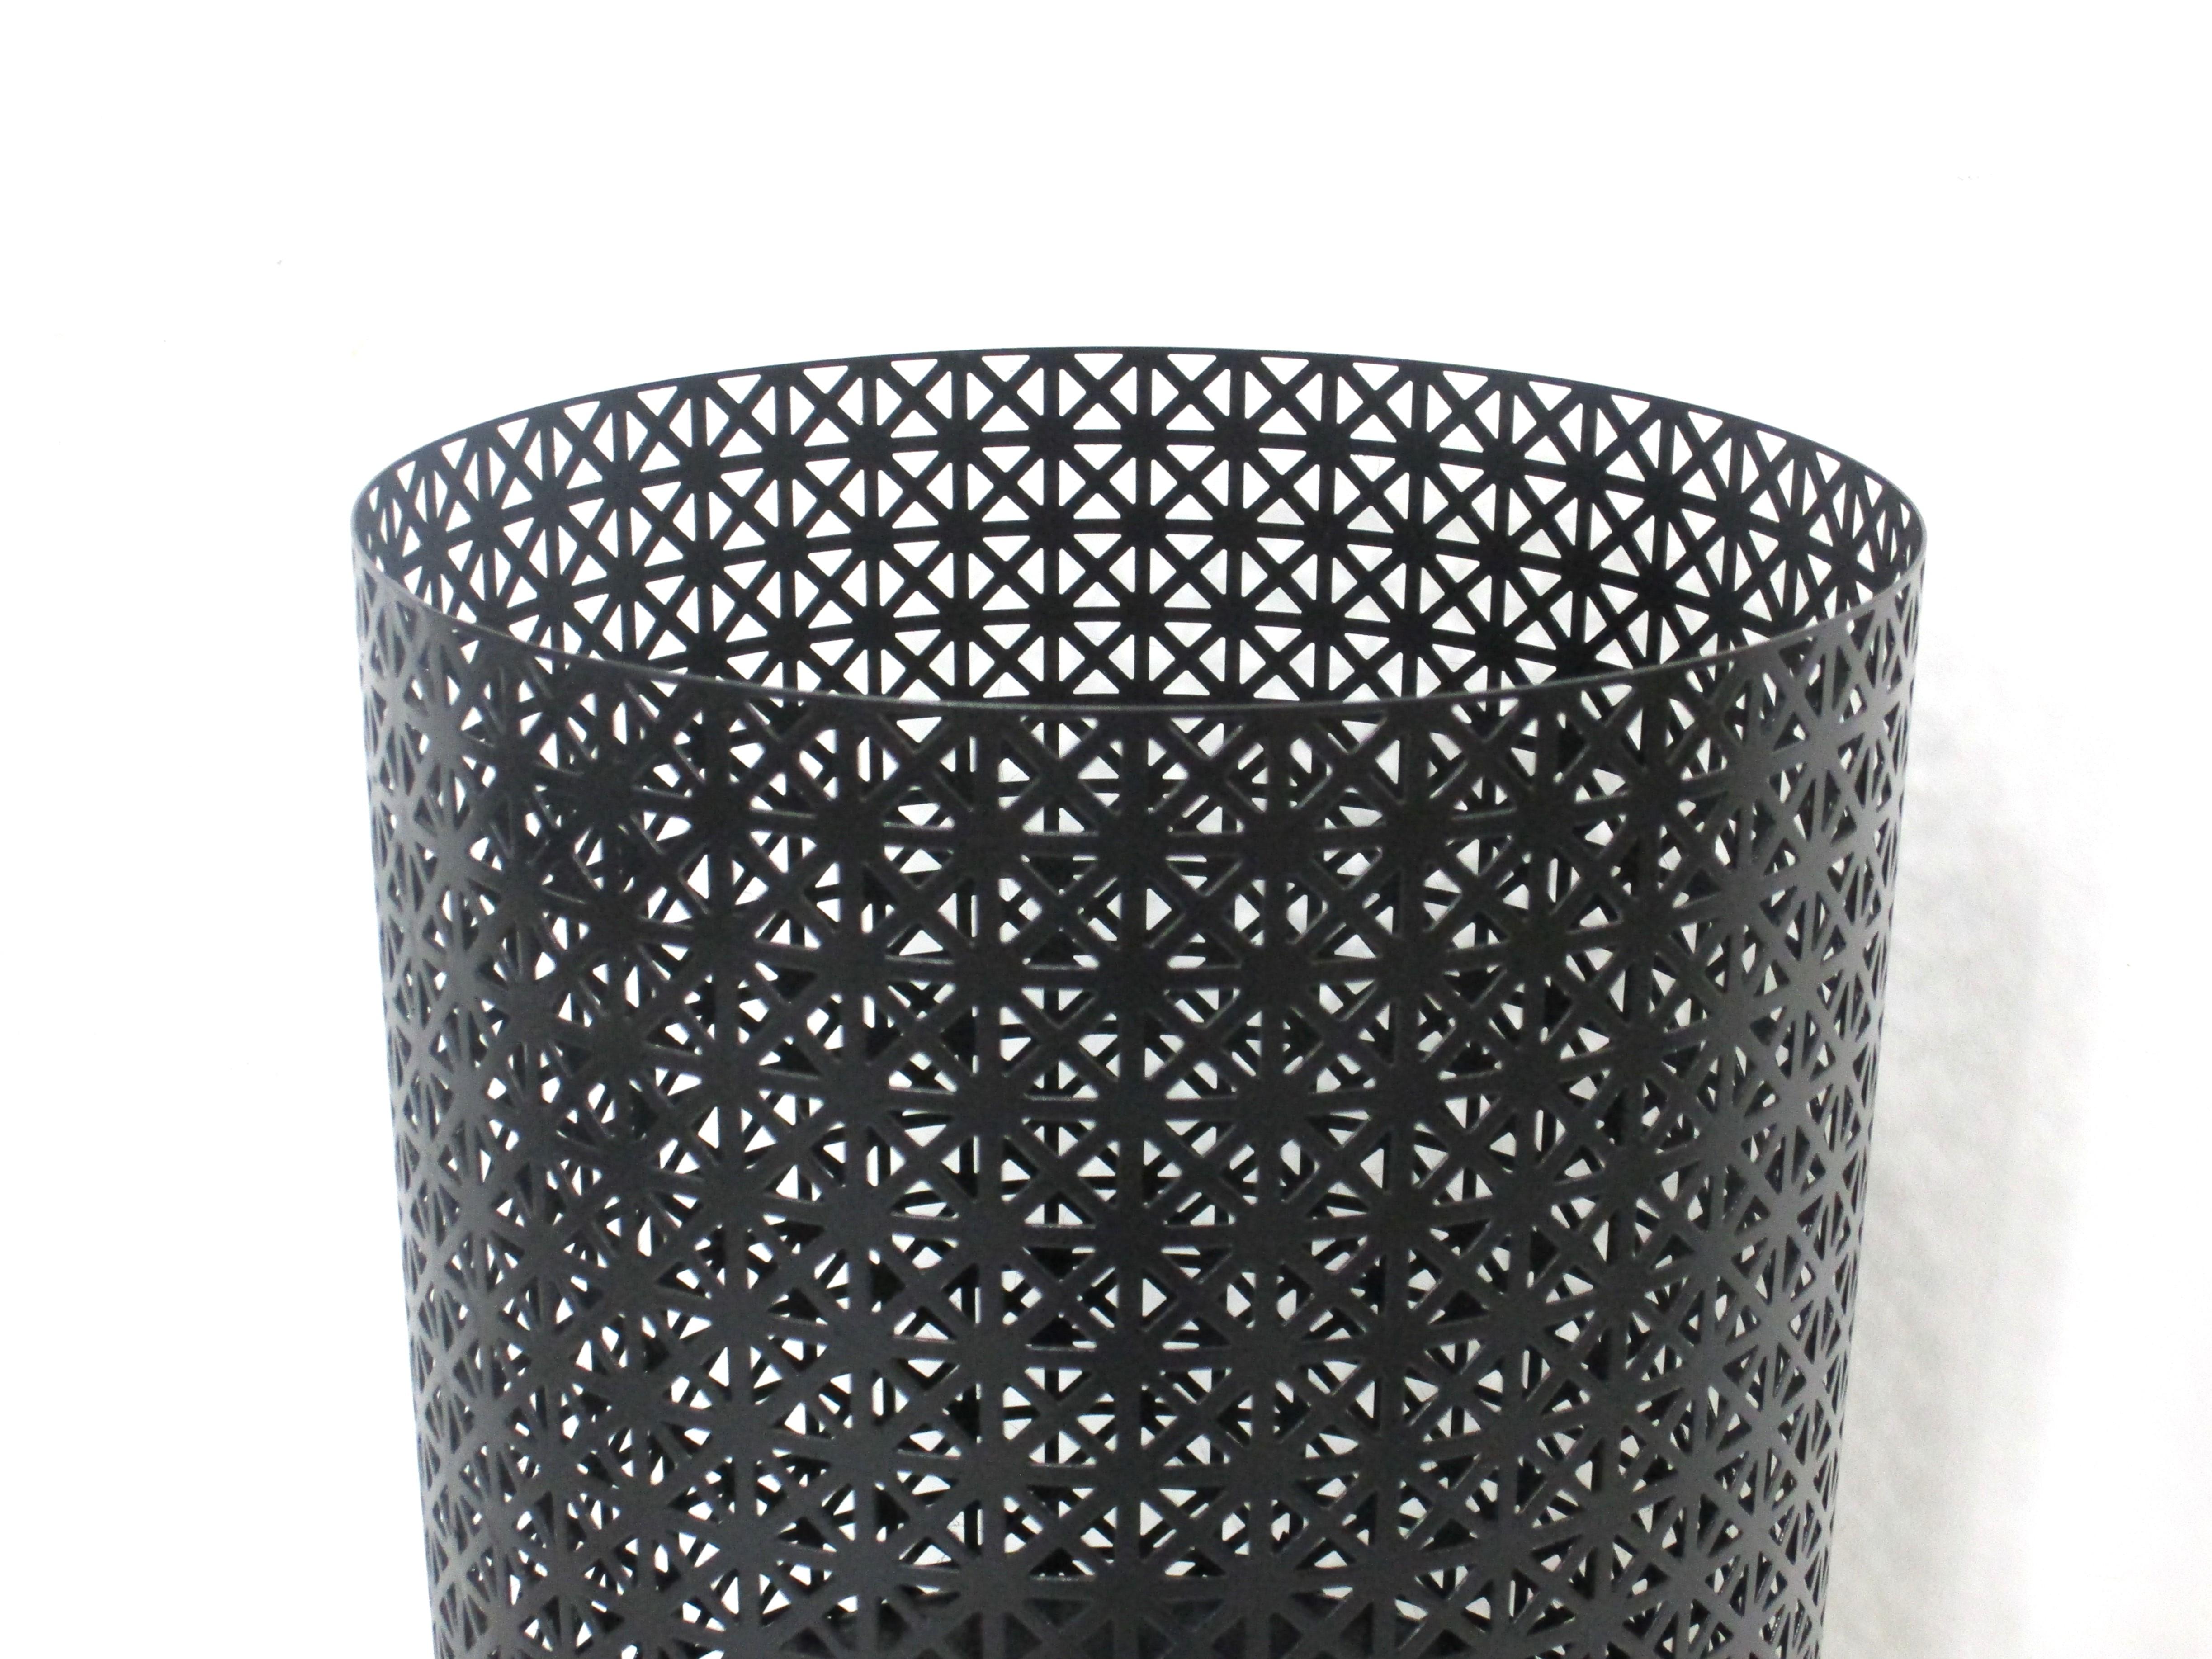 A satin black perforated metal trash basket with three legs having rubber capped ends to protect your floors . Very well crafted in the manner of French designer Mathieu Mategot a elegant form perfect for the home office ,dressing or bath area . 